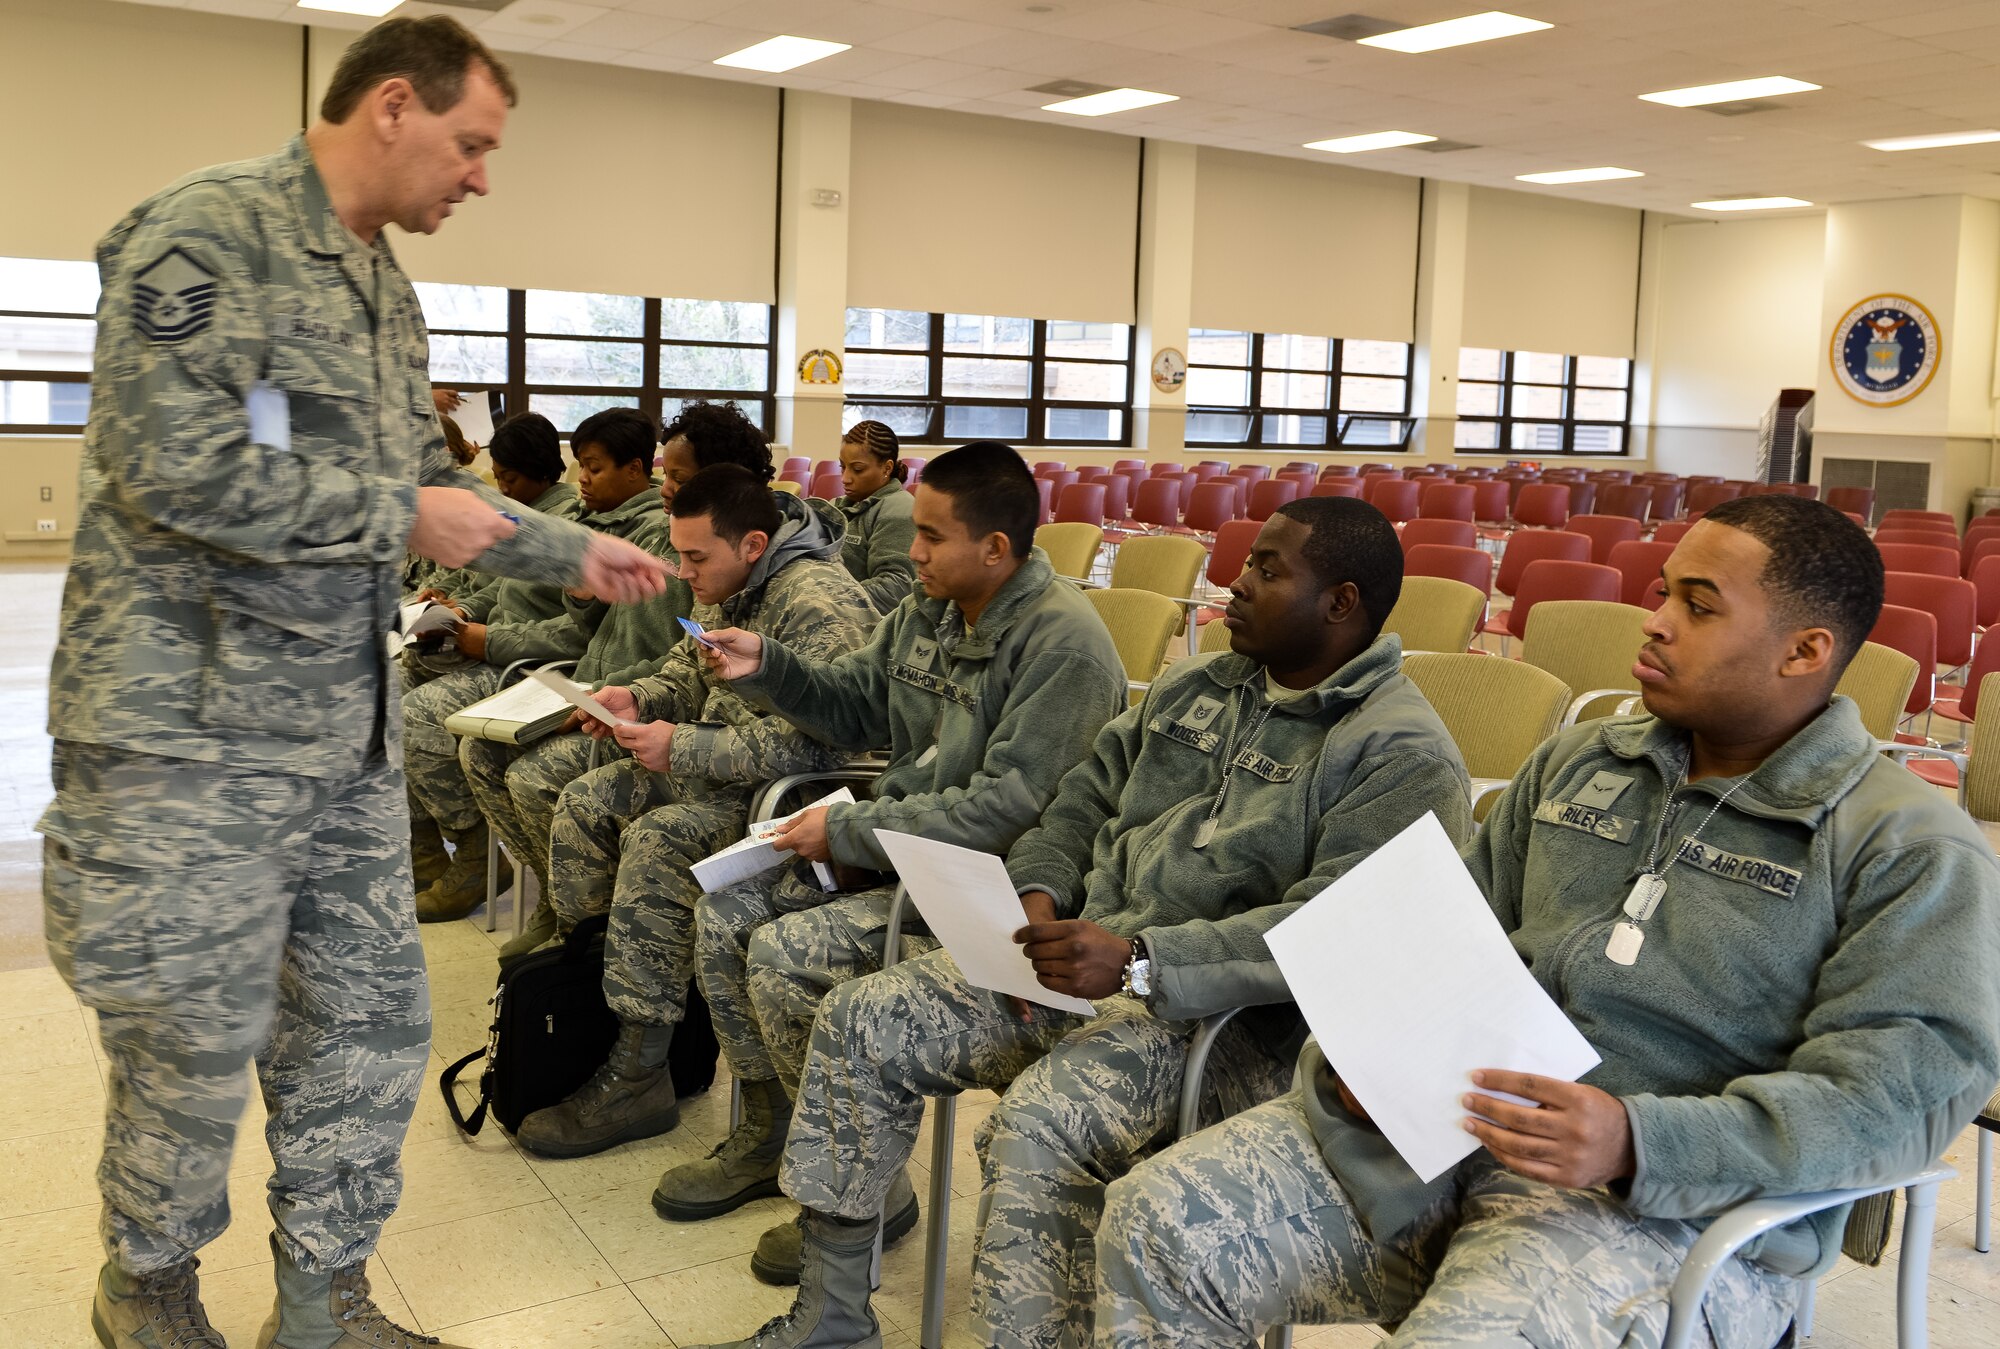 Air National Guard Master Sgt. Gareth Buckland from the 113 Wing Public Affairs, Joint Base Andrews, Md., hands out media cards to members of the Joint STARS 116th Force Support Squadron (FSS) from Robins Air Force Base, Ga., during in-processing for the 57th Presidential Inauguration at Joint Base Andrews, Jan. 17, 2013.  The Georgia Guardsman traveled to the National Capital Region with their field kitchen in tow to provide food service to troops supporting the events surrounding the inauguration.  (National Guard photo by Master Sgt. Roger Parsons/Released)